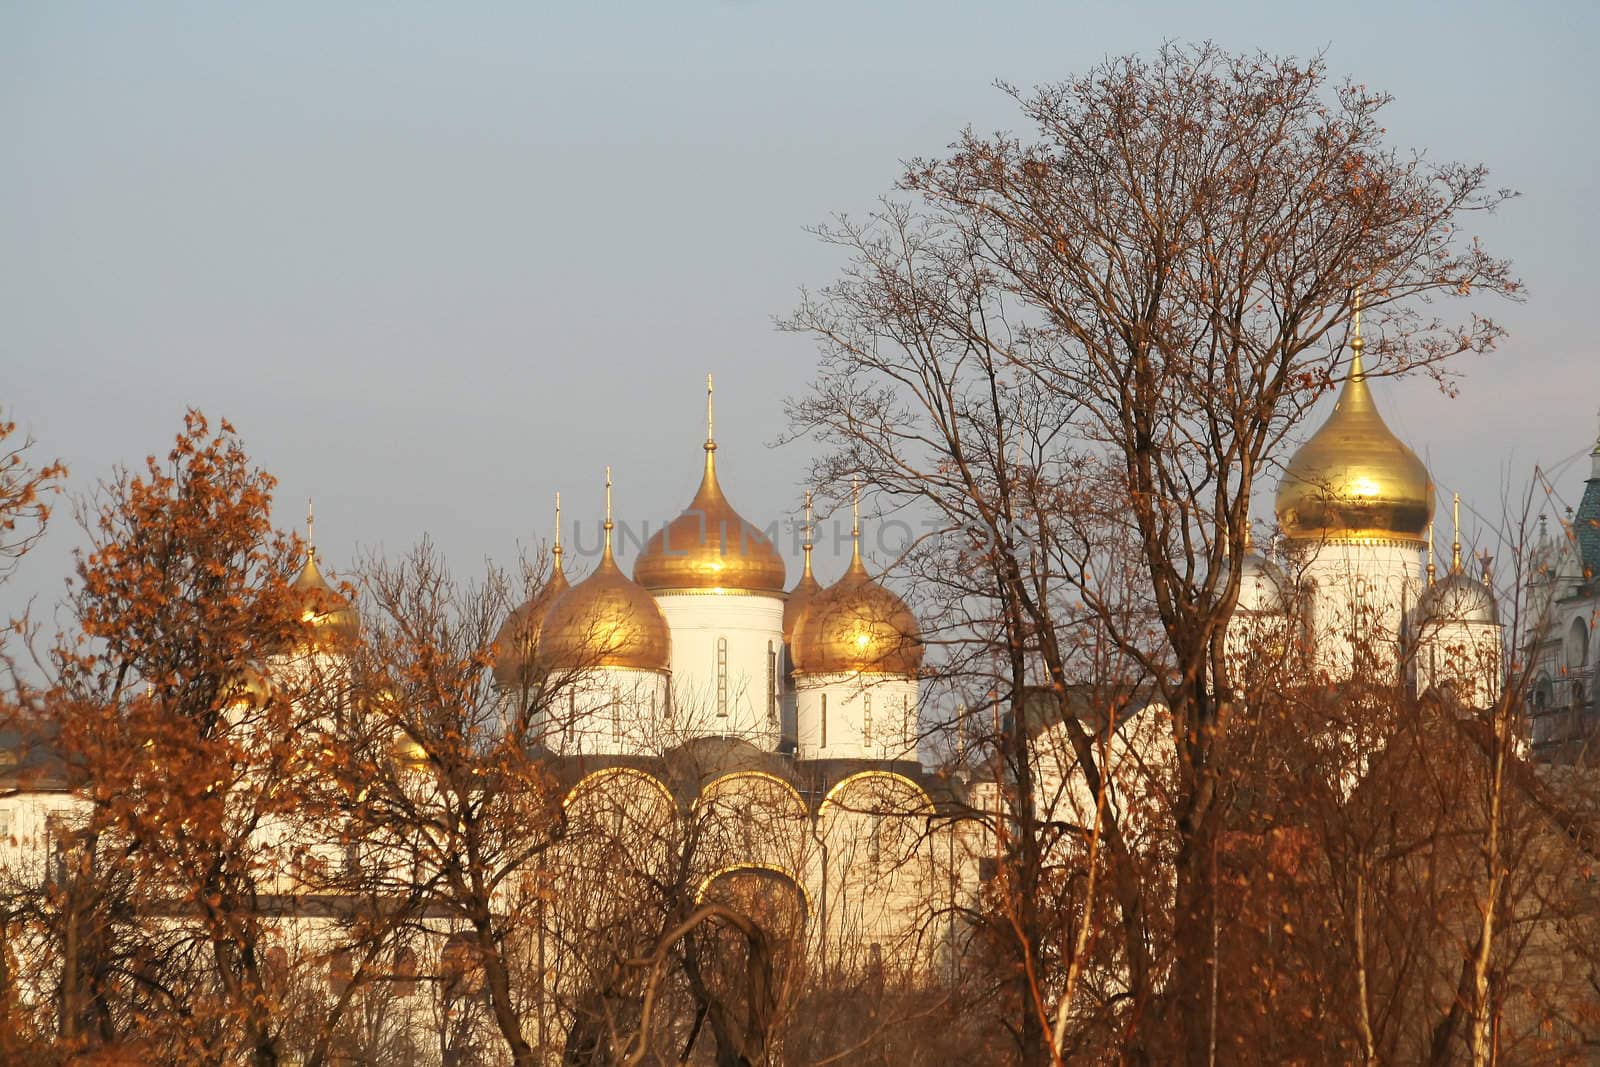 Domes of church in Old Moscow by Sergius